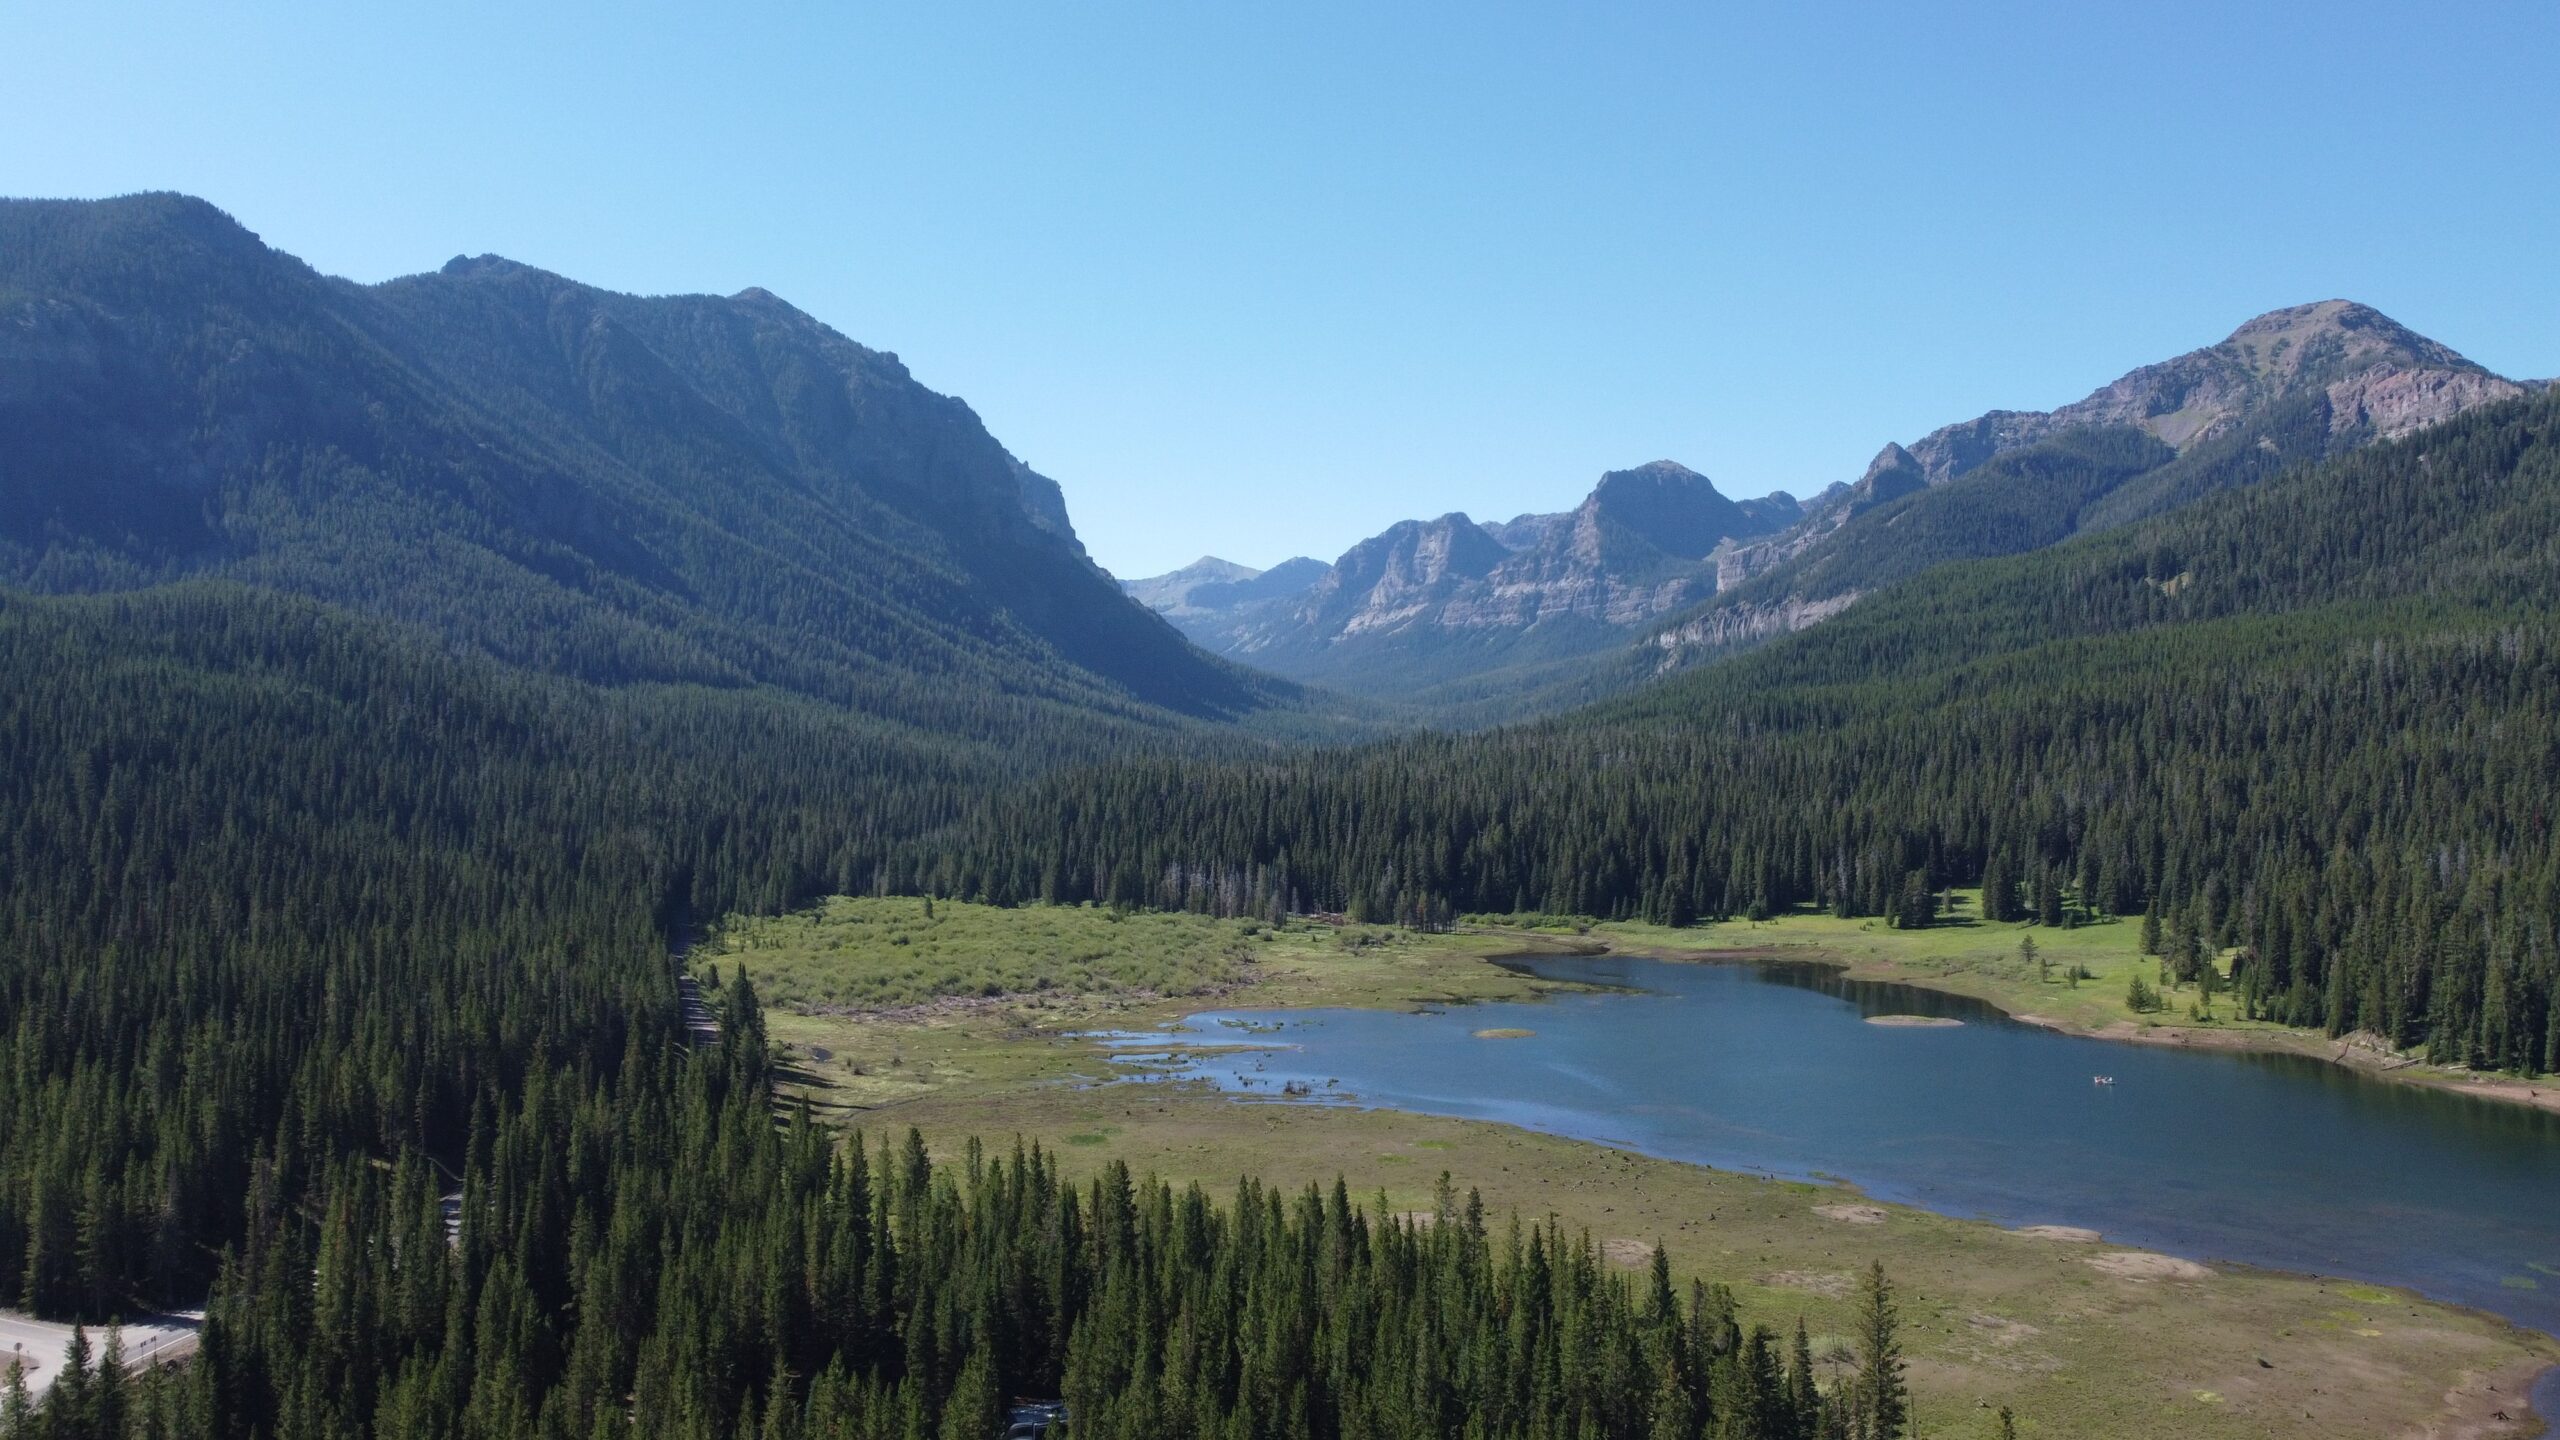 Beautiful landscape of the Hyalite reservoir in Montana.